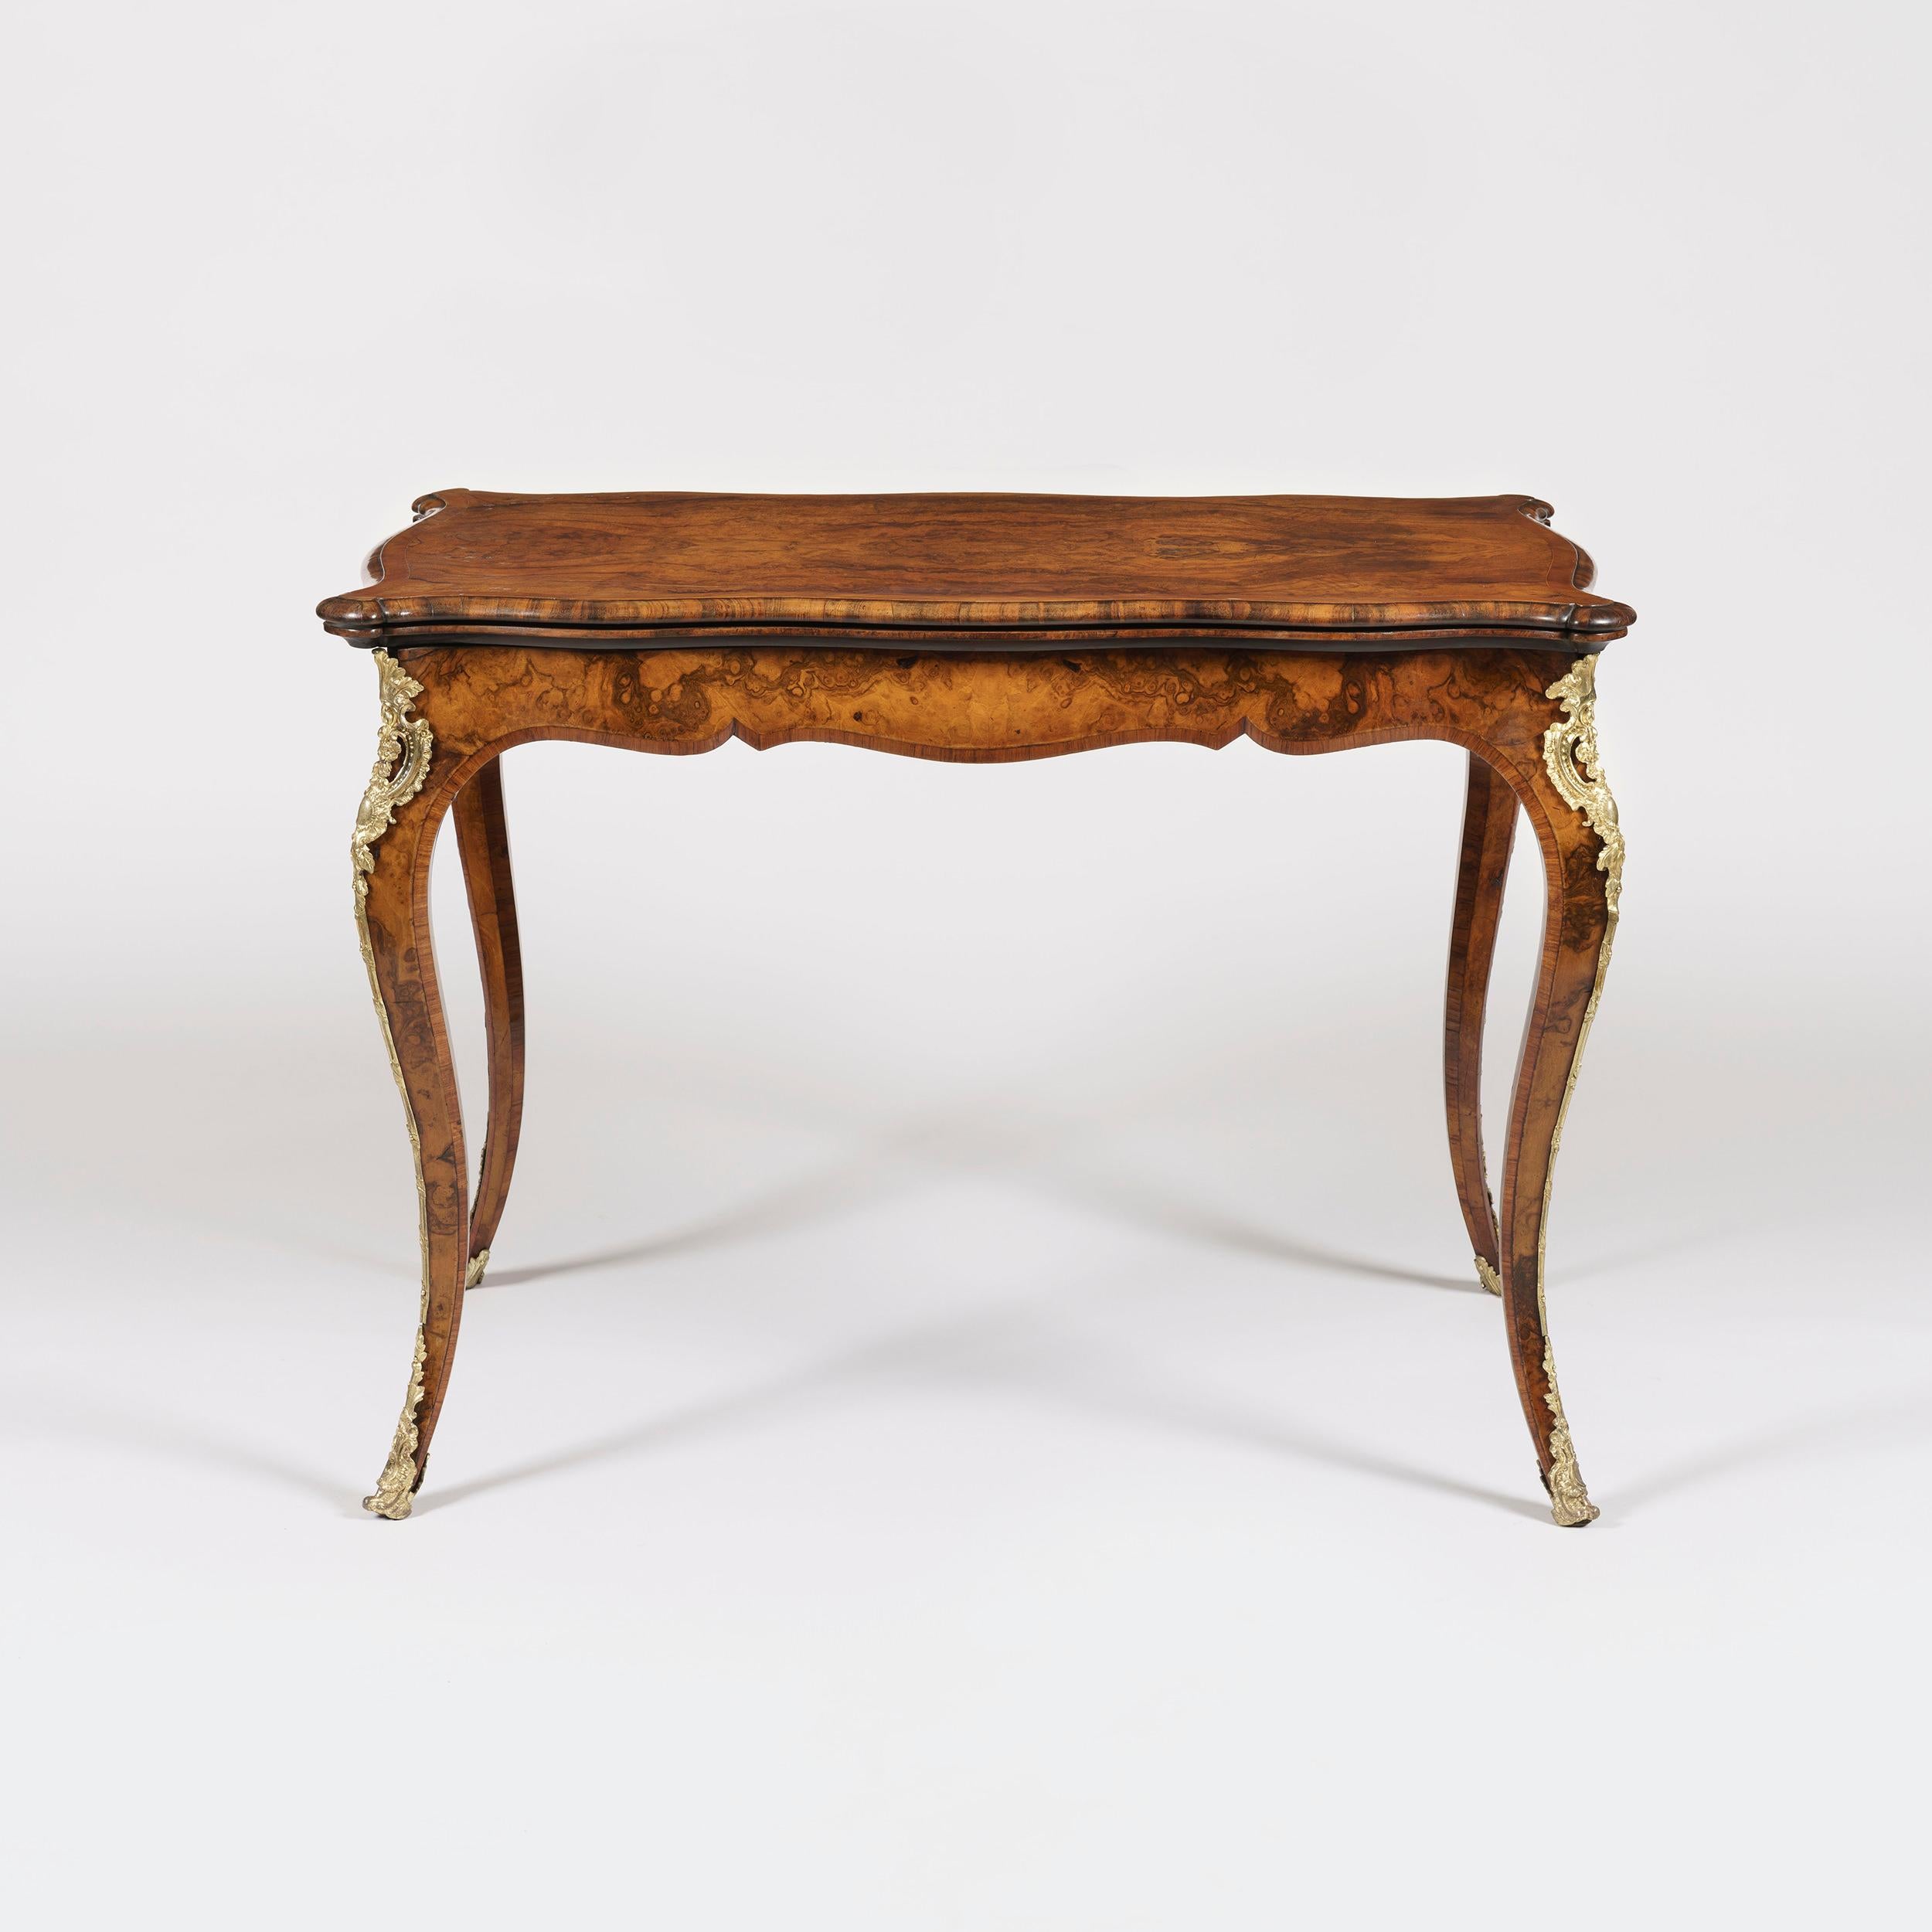 A walnut serpentine card table firmly attributed to Gillows
Constructed using finely figured Circassian walnut, dressed with gilt bronze mounts; rising from slender kingwood banded cabriole legs shod with bronze sabots and espagnolettes. The shaped